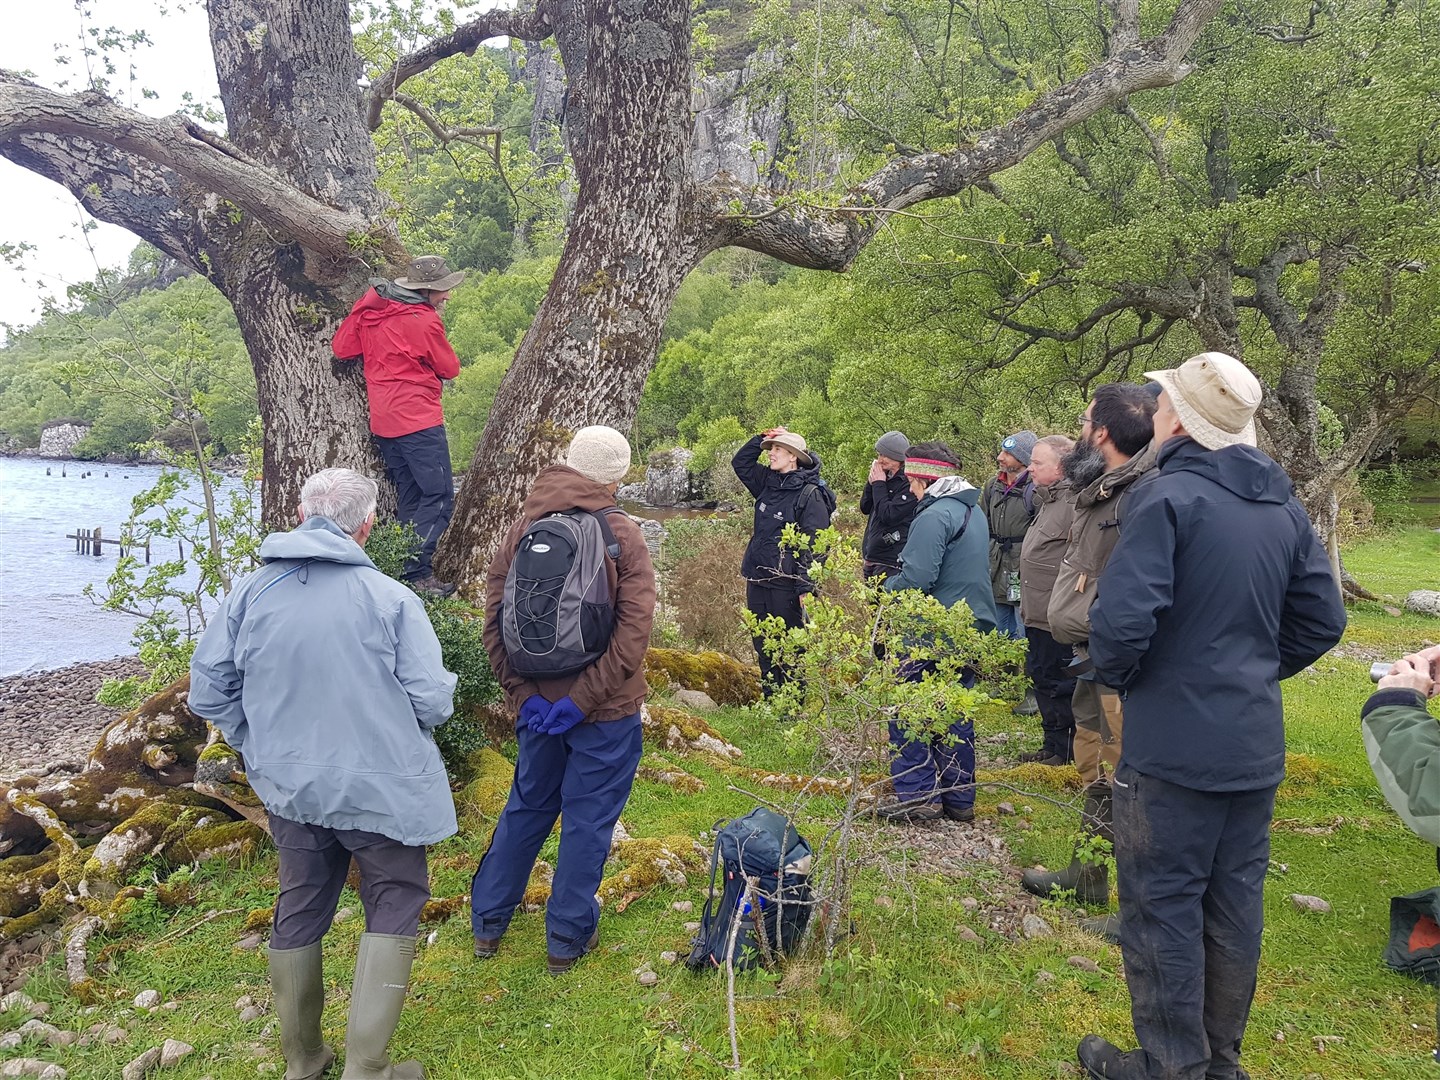 Oliver from Plantlife talking about lichen at the HEF visit.